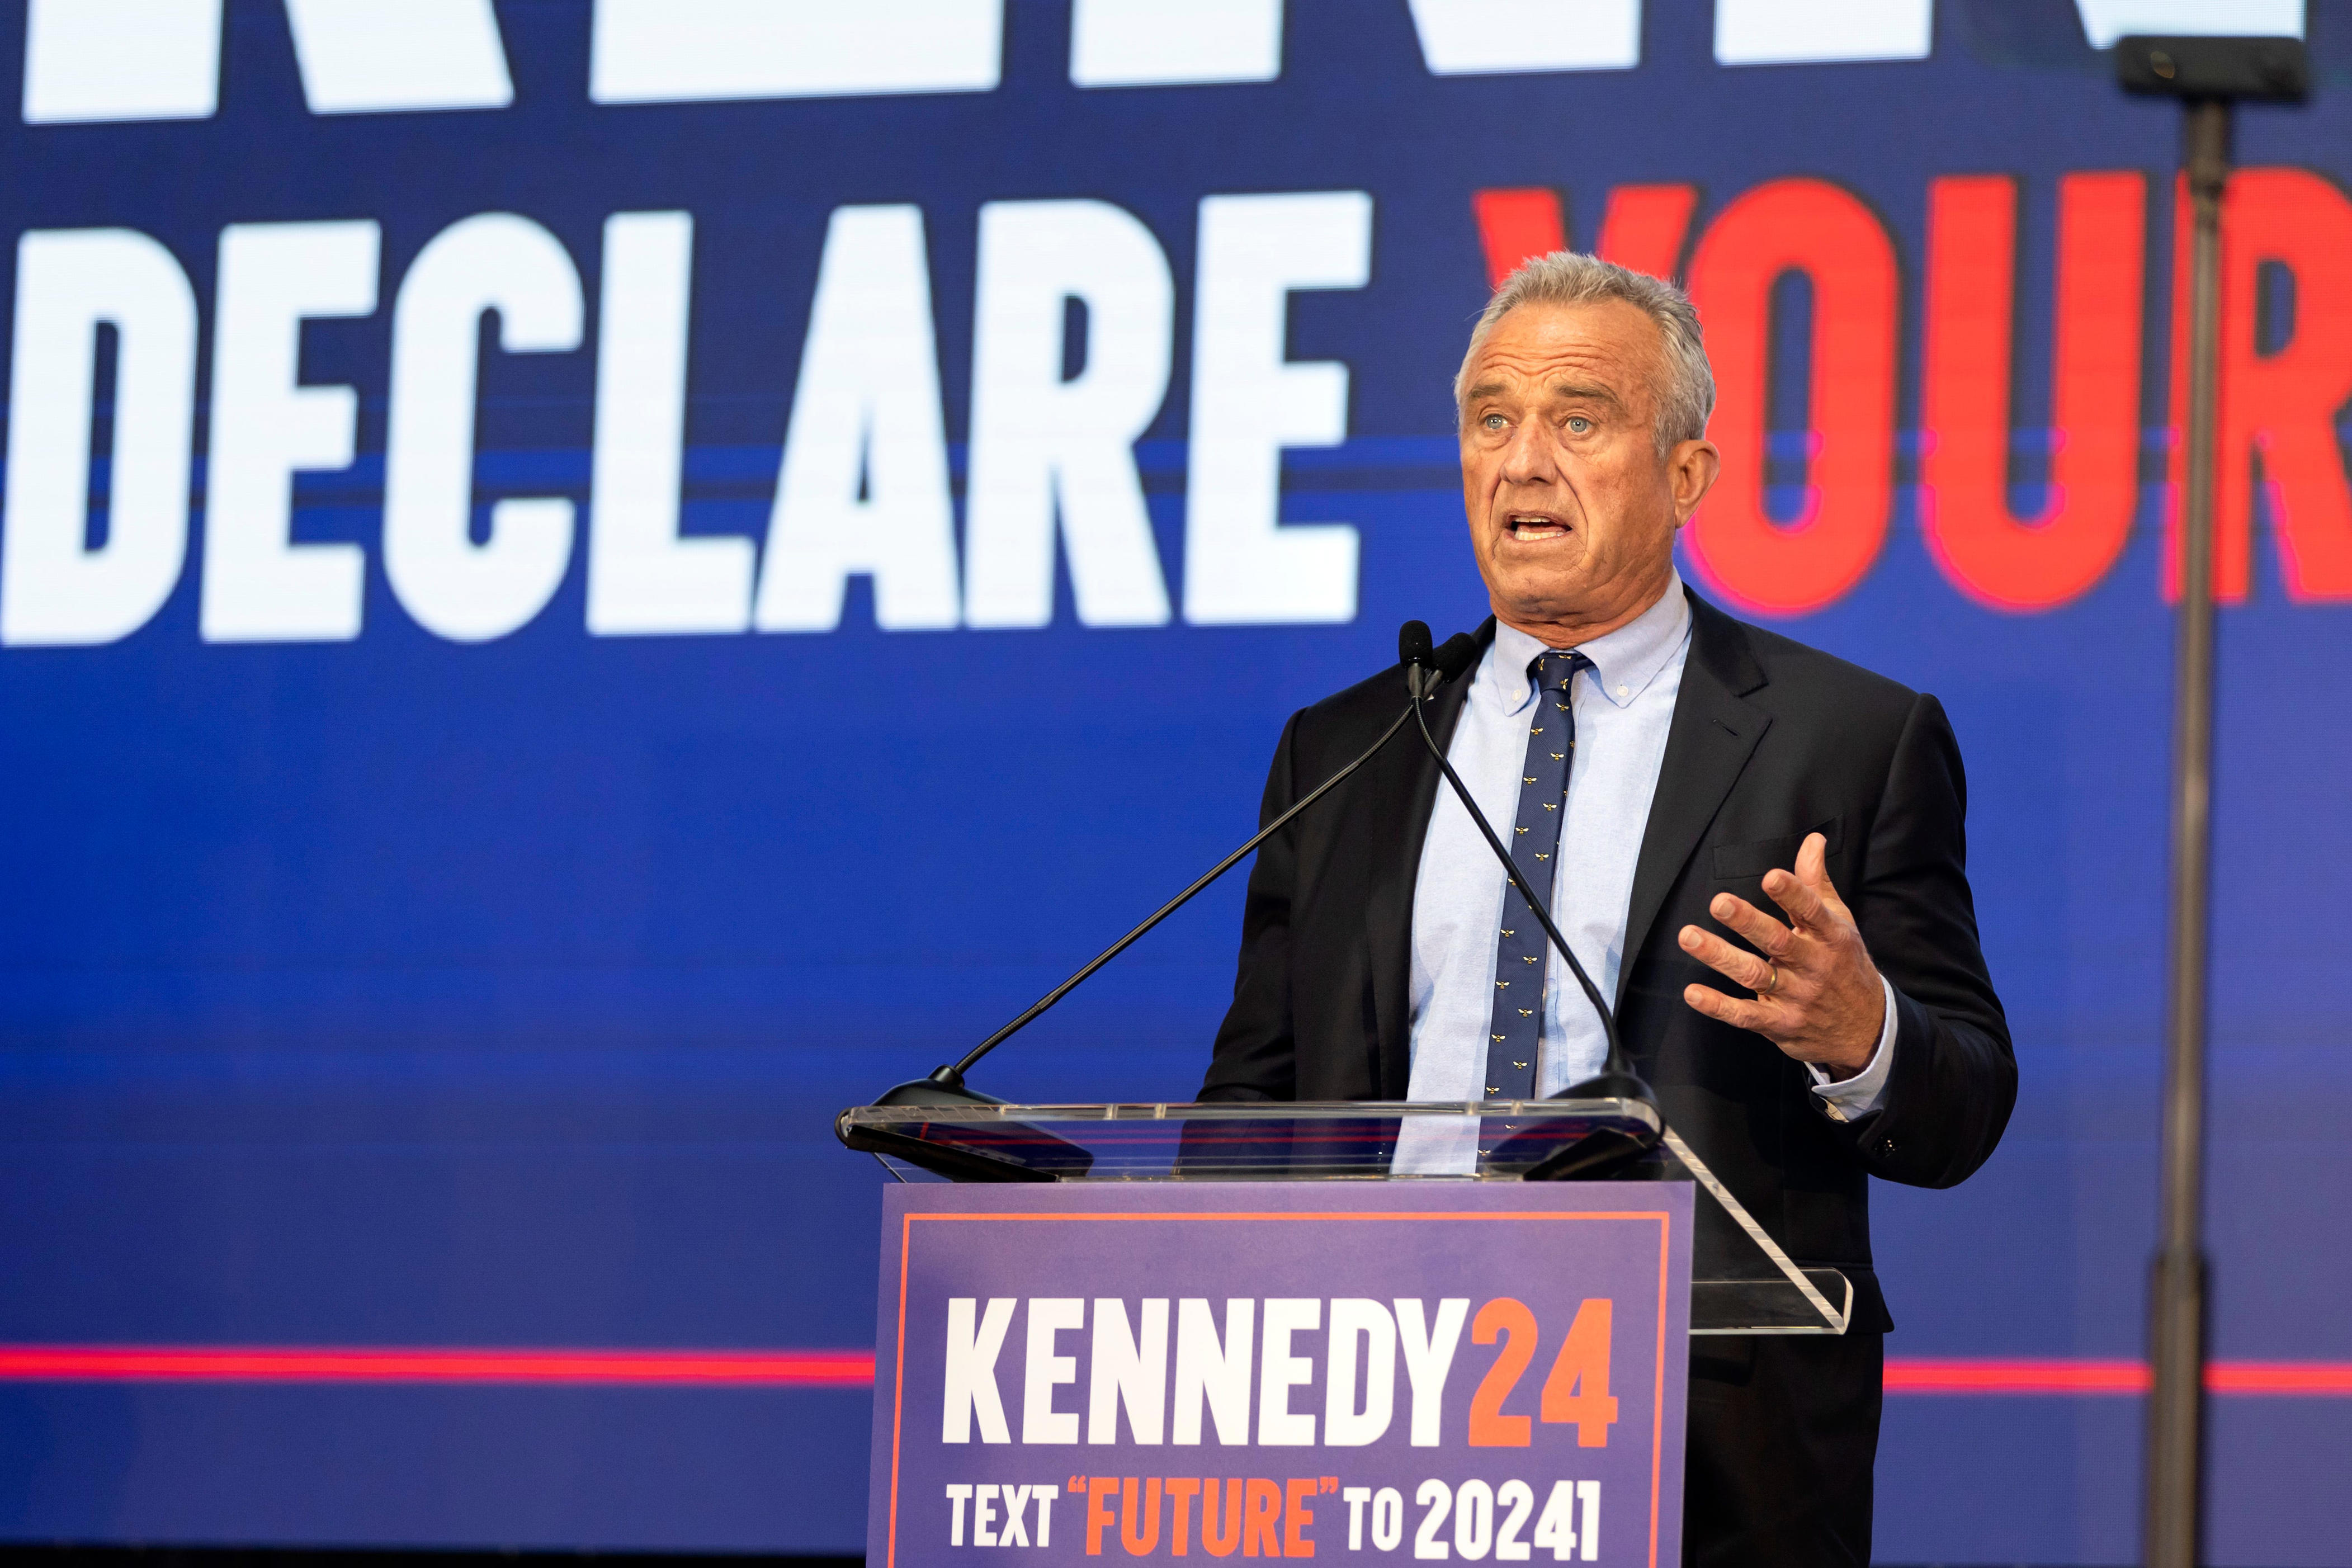 rfk jr.'s vp pick shows his presidential bid for what it is: a vanity project all about him